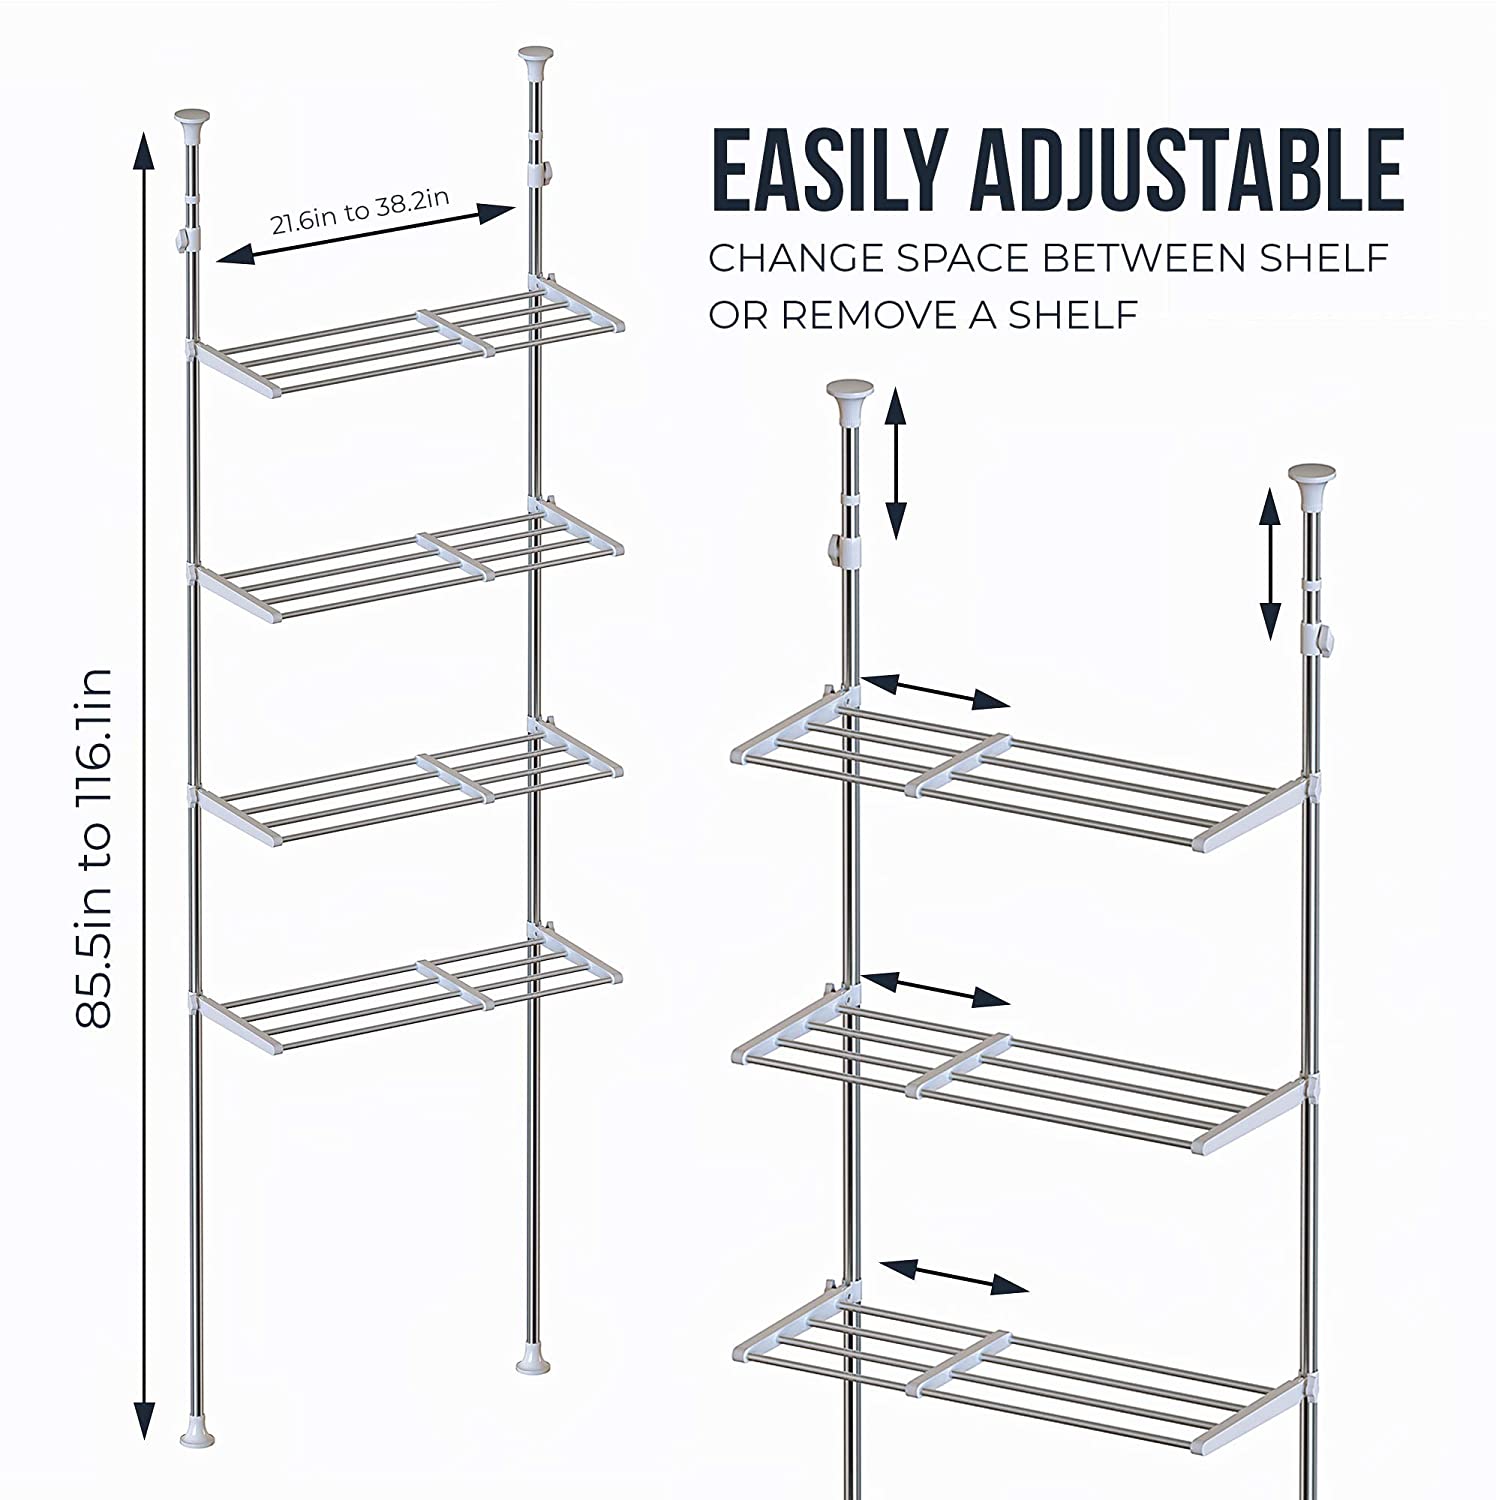 Skywin Over The Washer Storage Shelf - Easy to Assemble Laundry Storage, Laundry Shelf for Over Washer or Dryer with Adjustable Height and Width, No